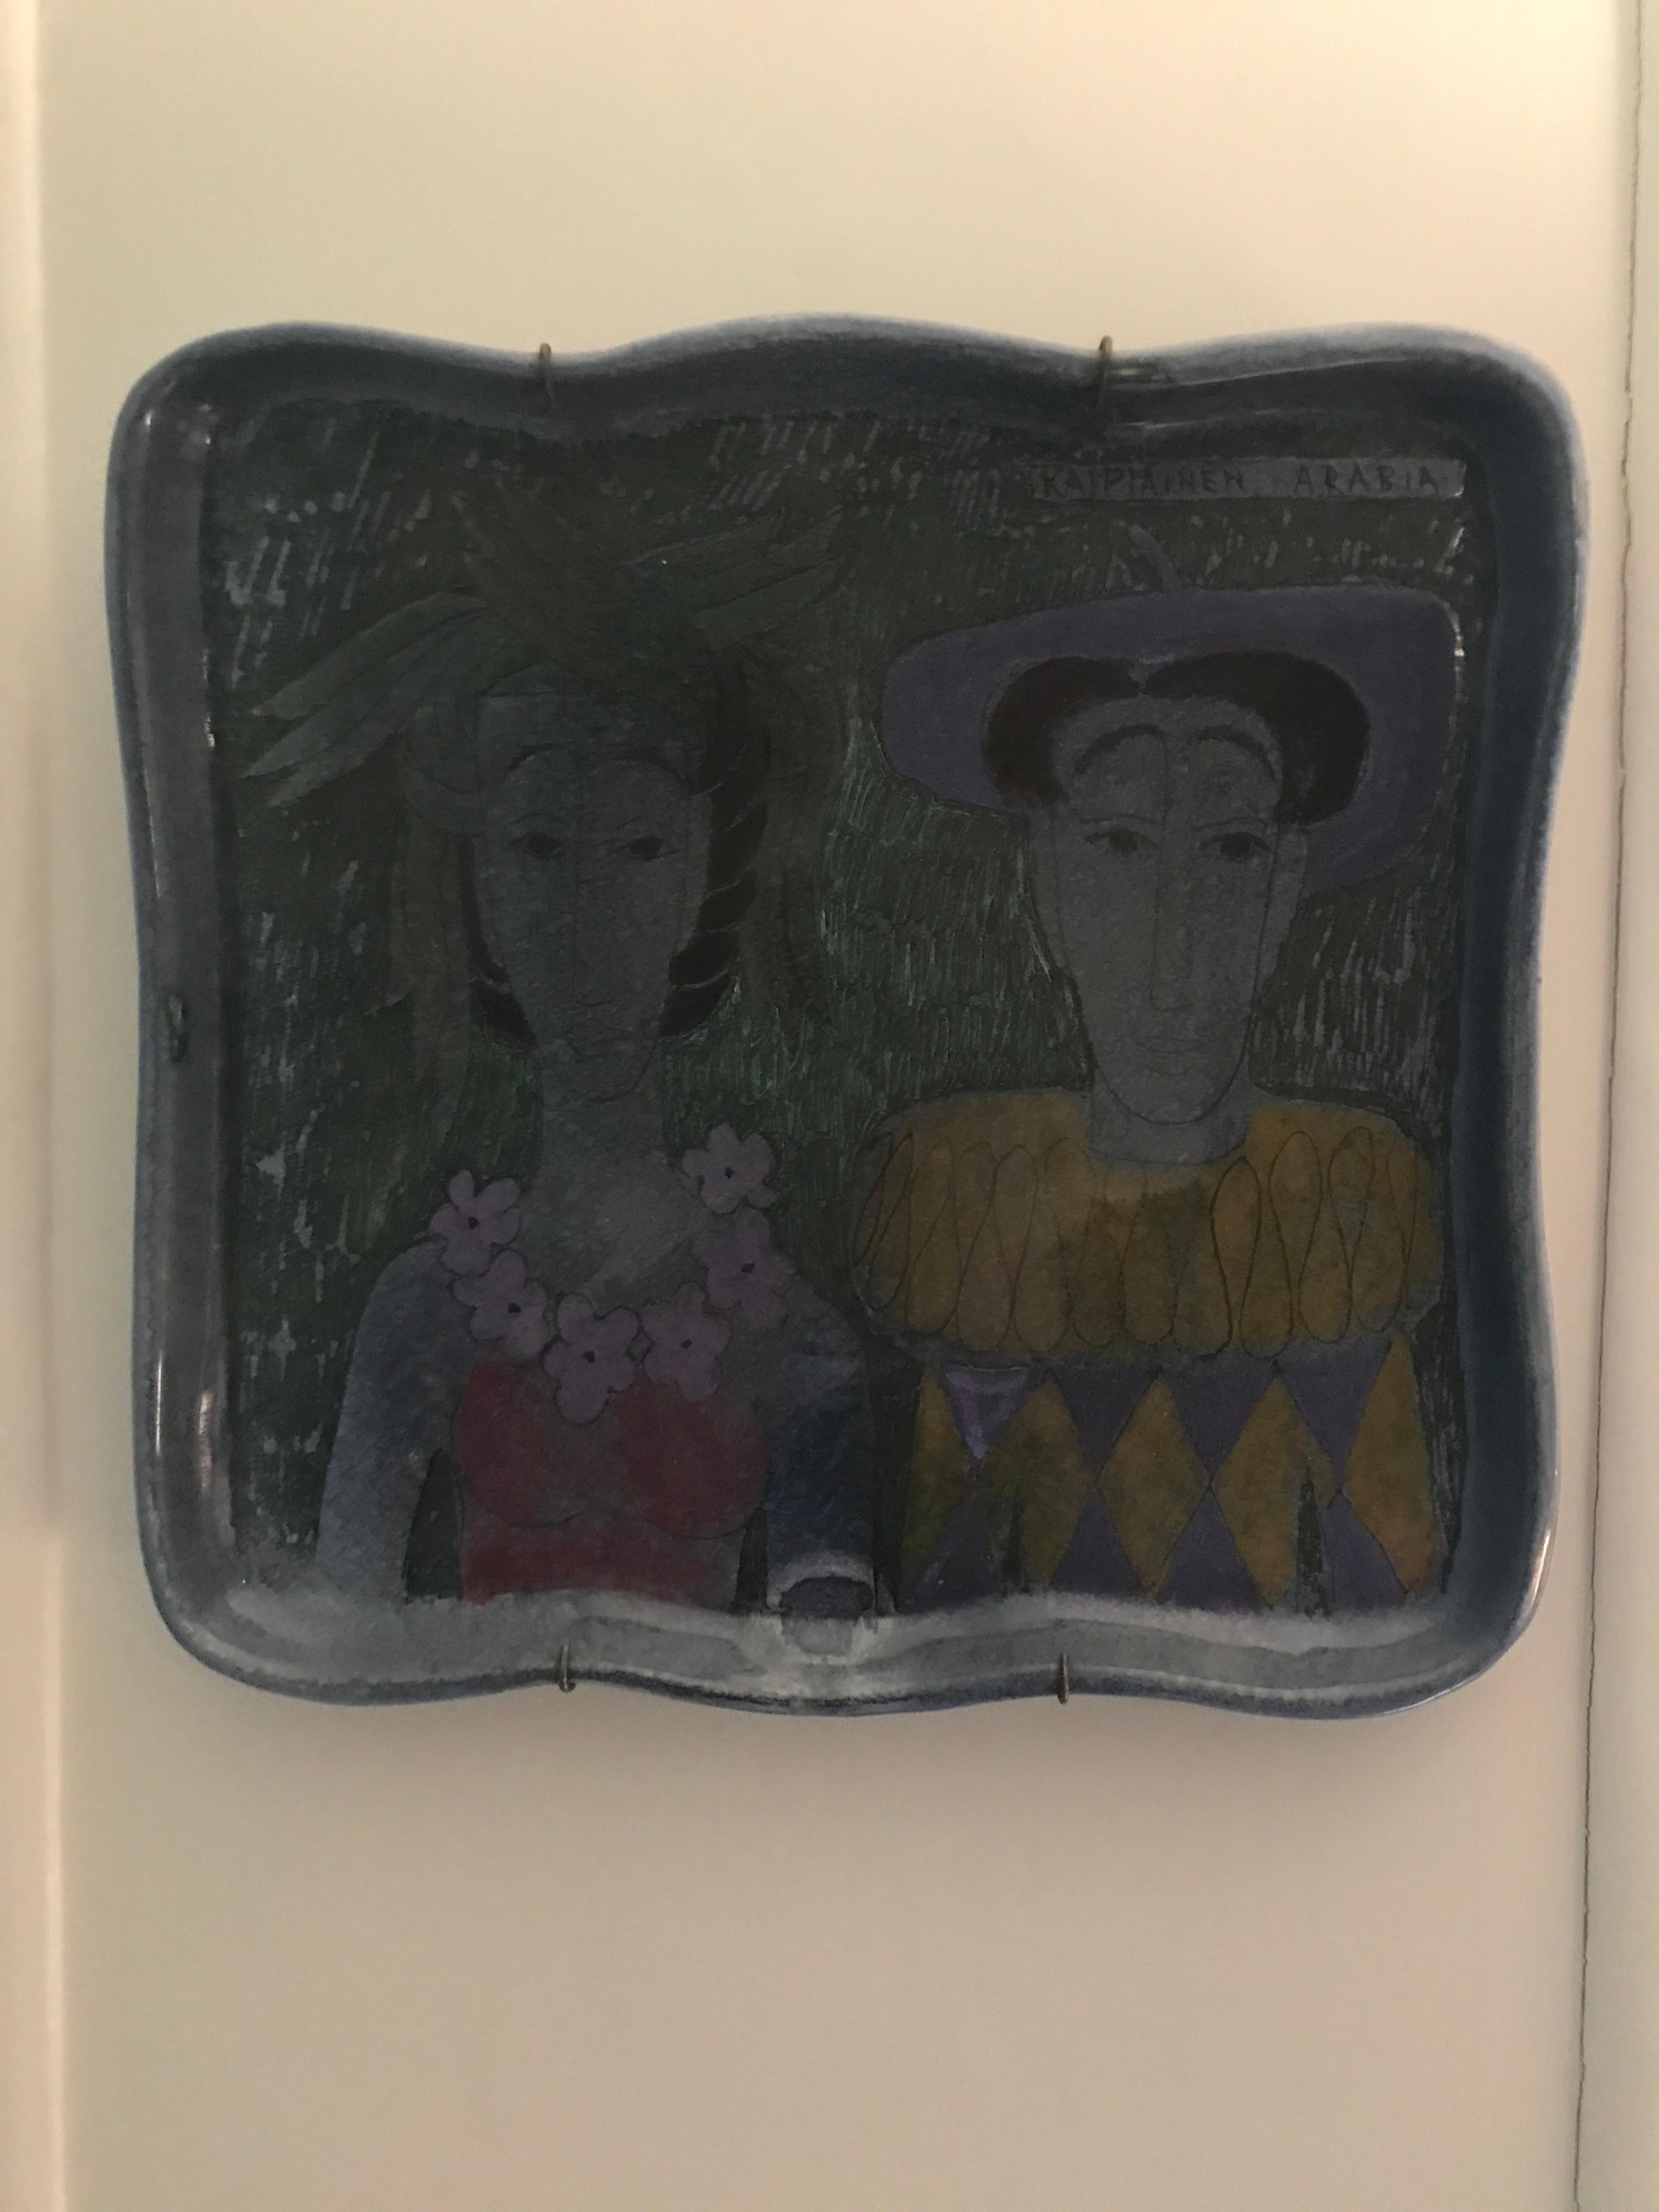 Amazing Birger Kaipiainen ceramic hanging platter with decoration on pink fund.

Birger Johannes Kaipiainen (1915-1988) graduated from the Central School of Arts & Crafts of Helsinki and worked for Finnish ceramics company Arabia for more than